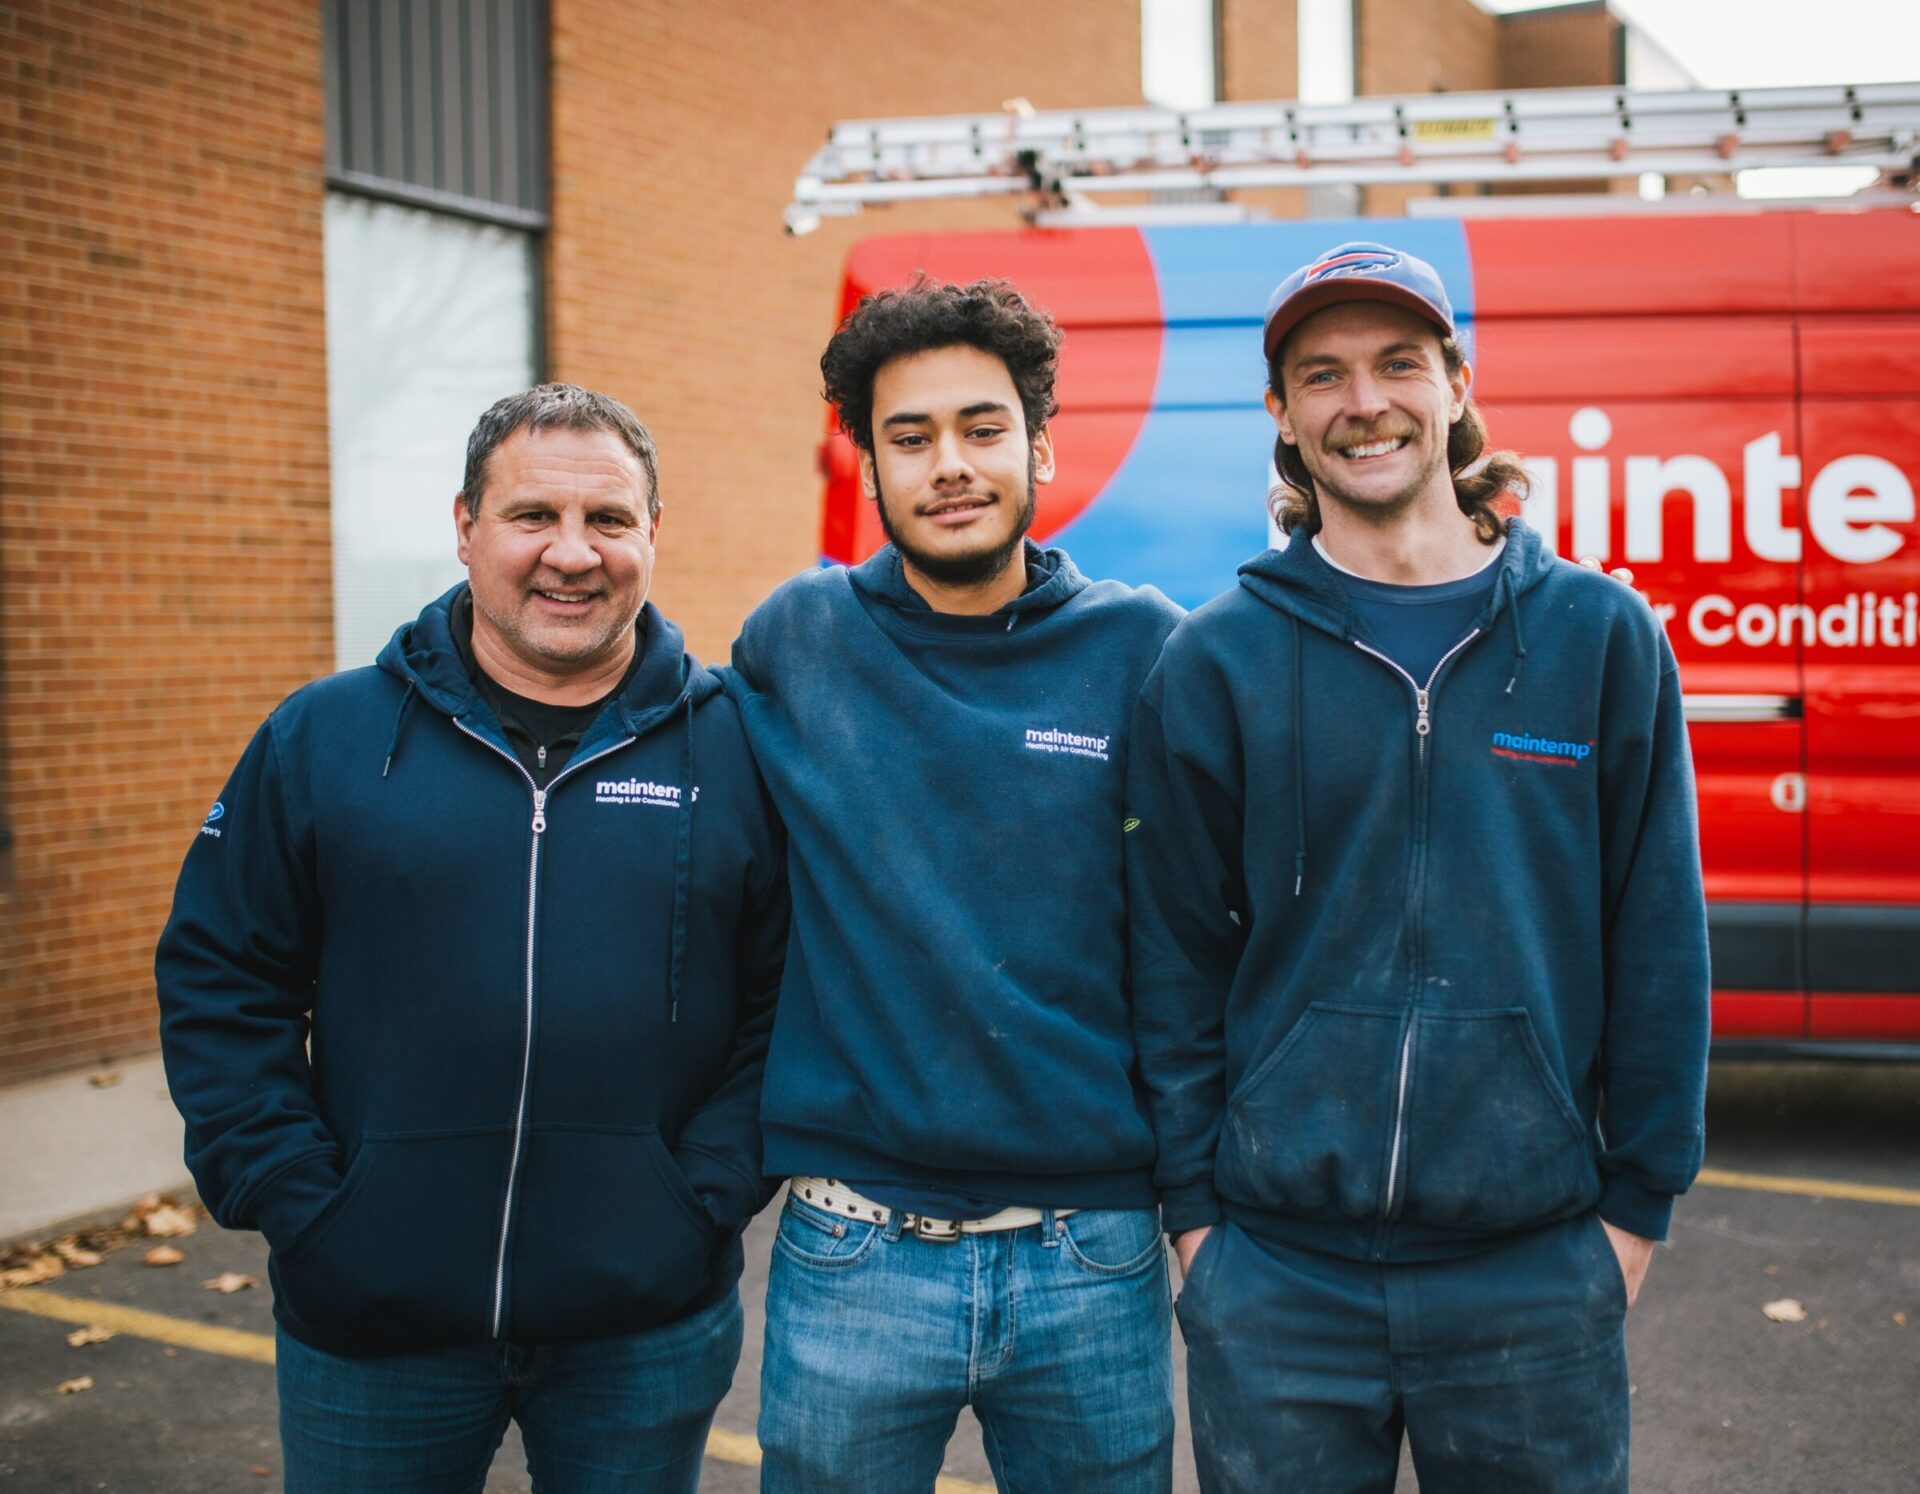 Three people in work uniforms stand smiling in front of a red van with "Maintenance & Conditioning" text. They look content and professional.